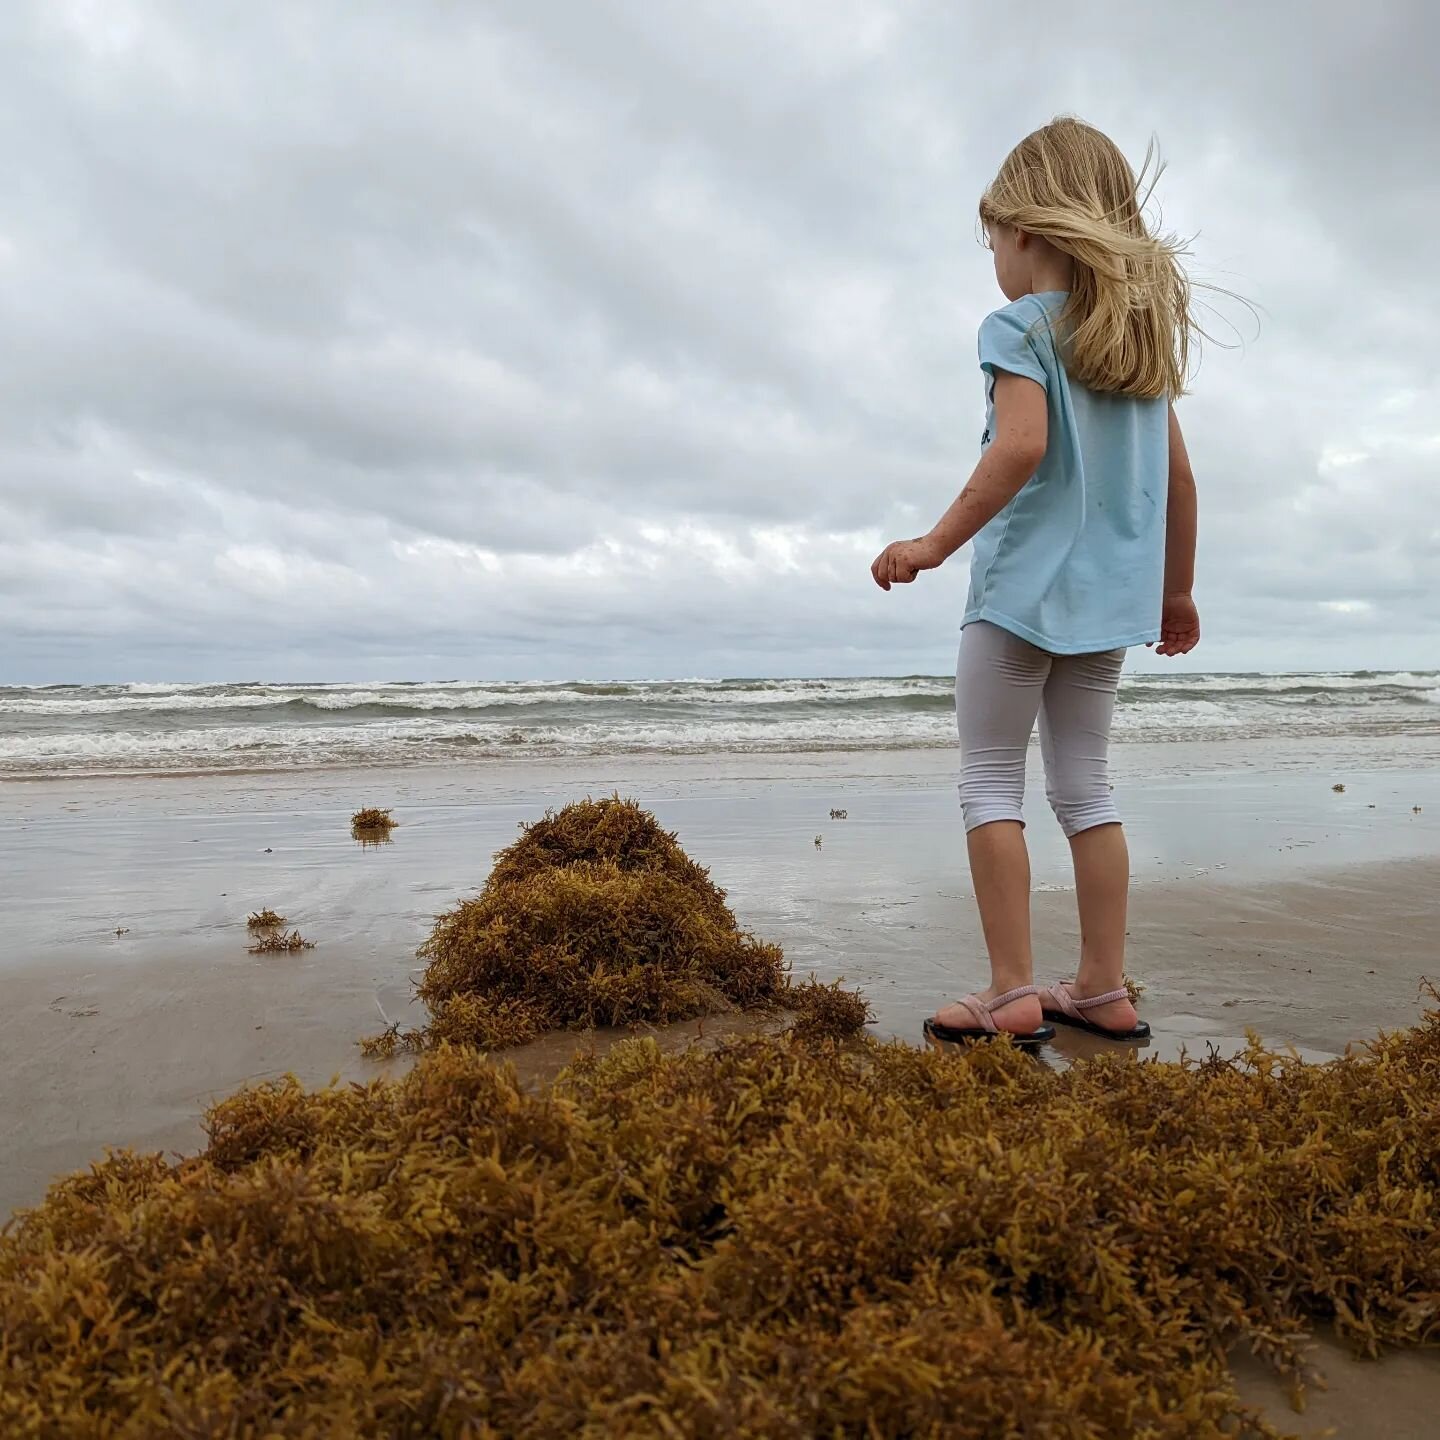 Contemplating invest 95 as the waves have picked up in intensity and the wind was blowing in. The girls had fun playing in the abundant seaweed that washed in. Each clump hosts tiny ghost crabs, little shrimp, and more. Tasty snacks for all the beach